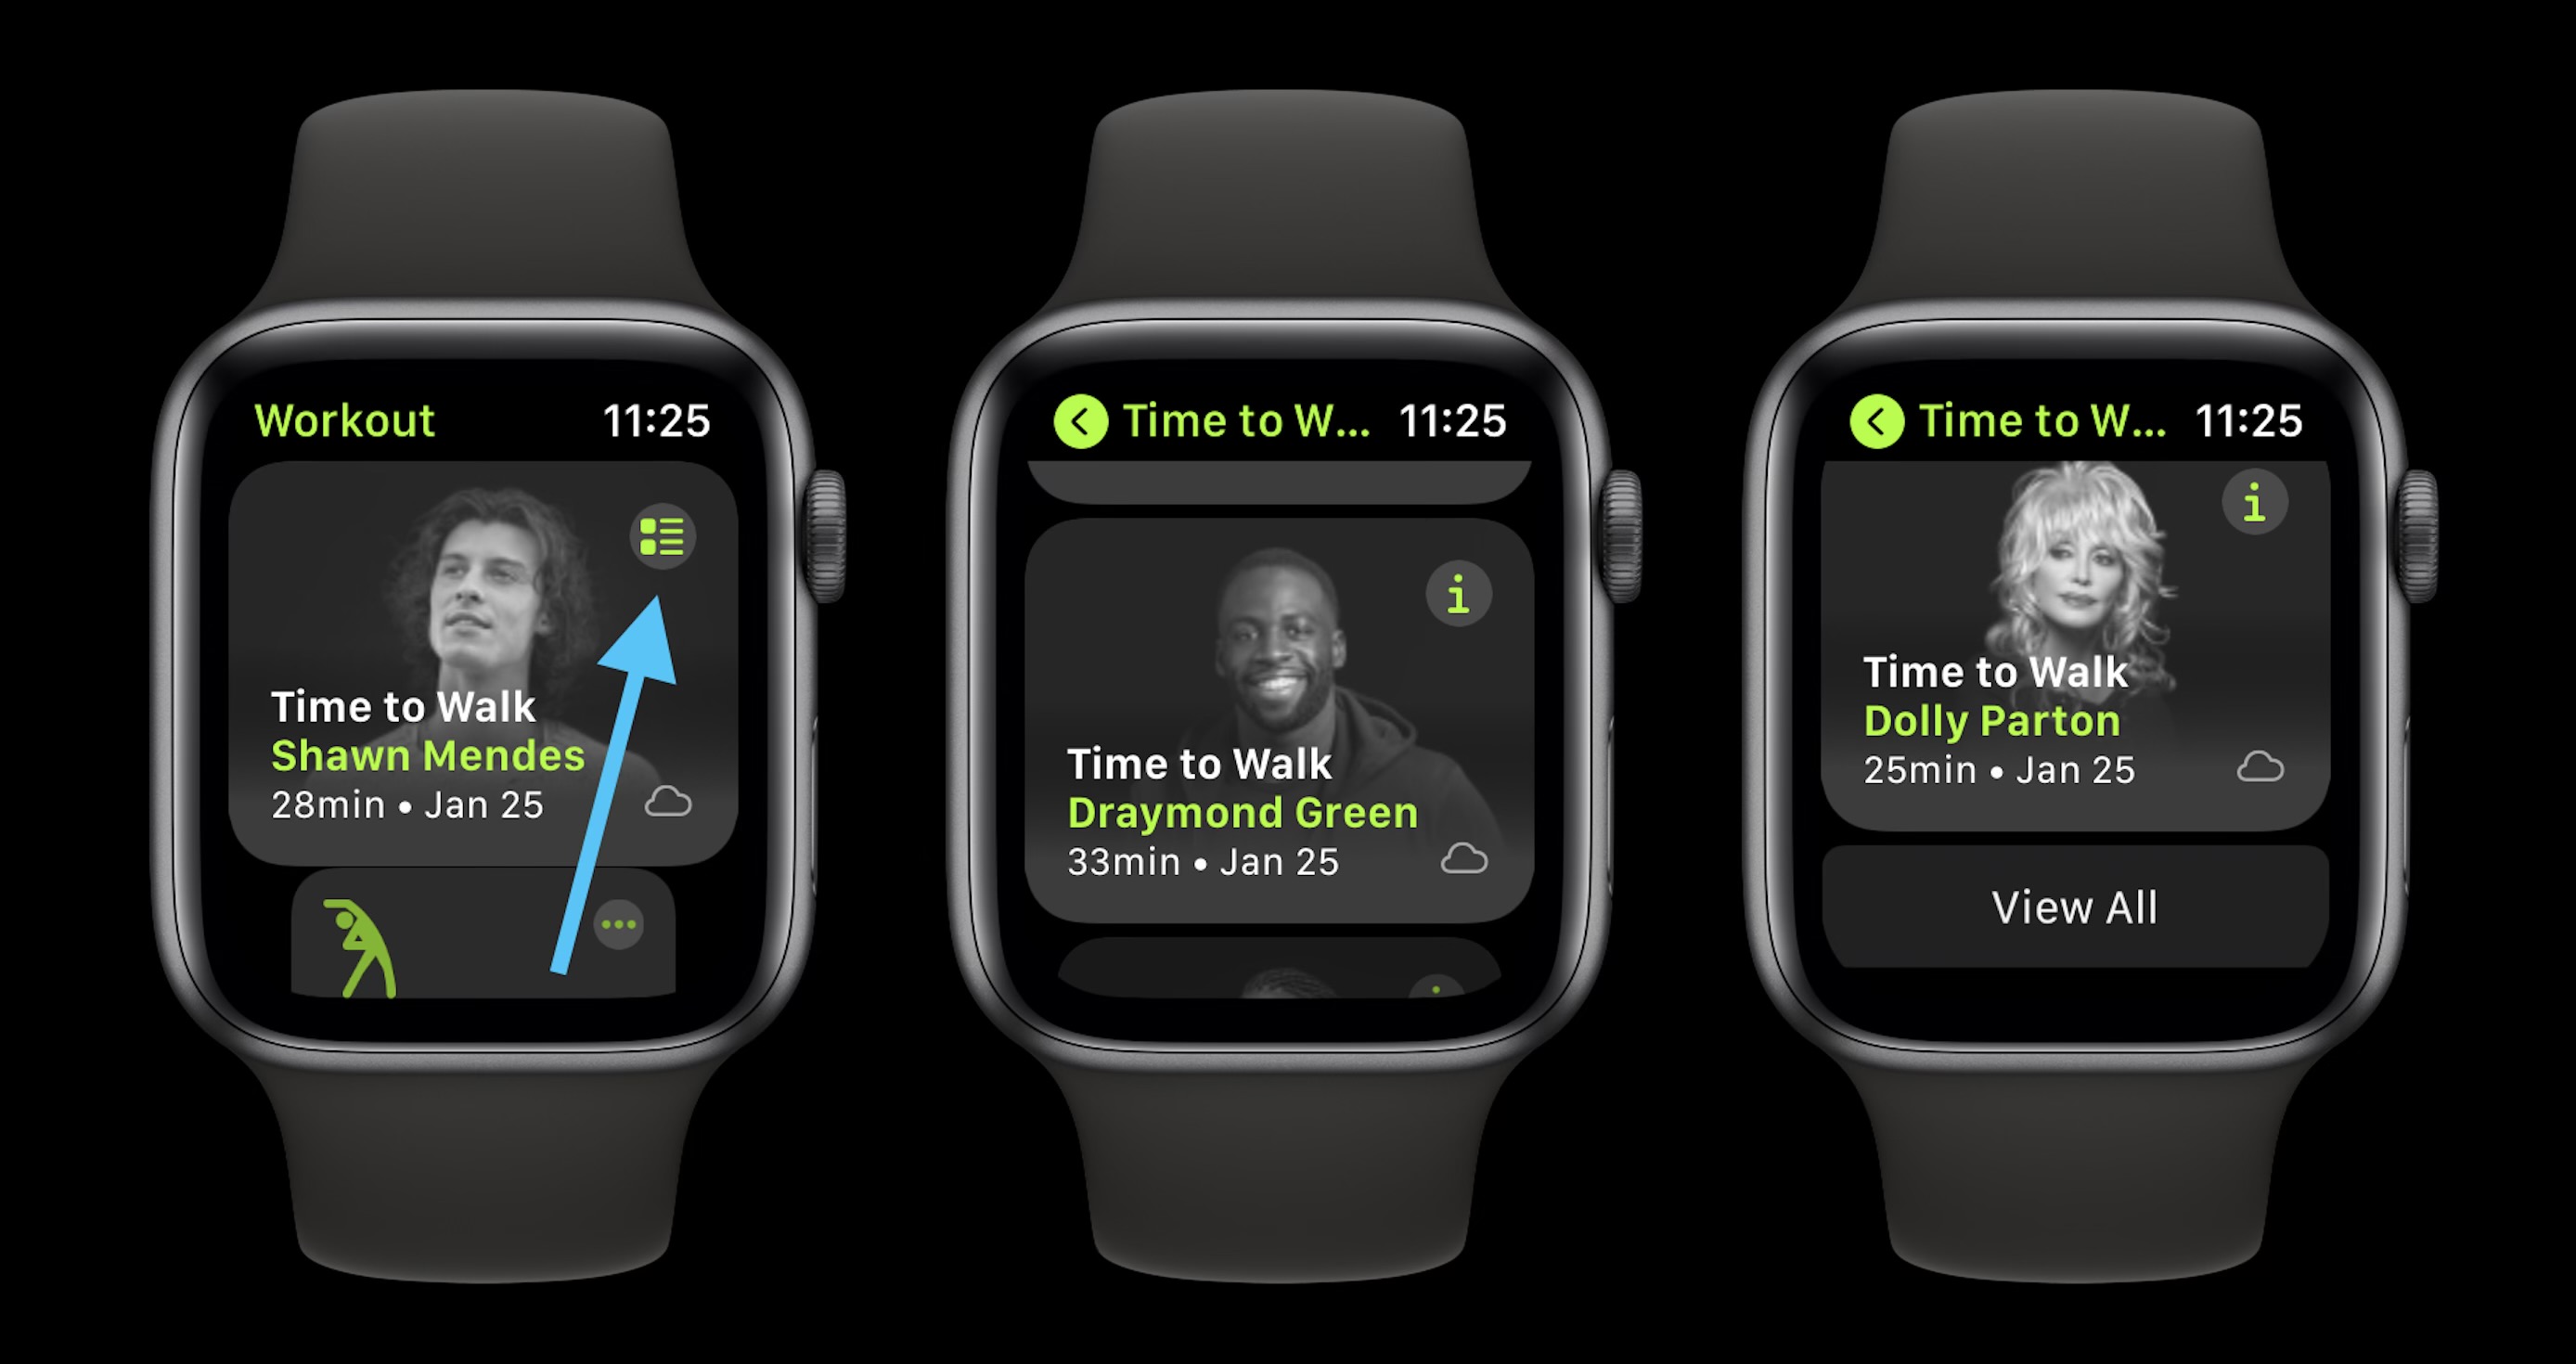 How to use Apple Watch Time to Walk feature